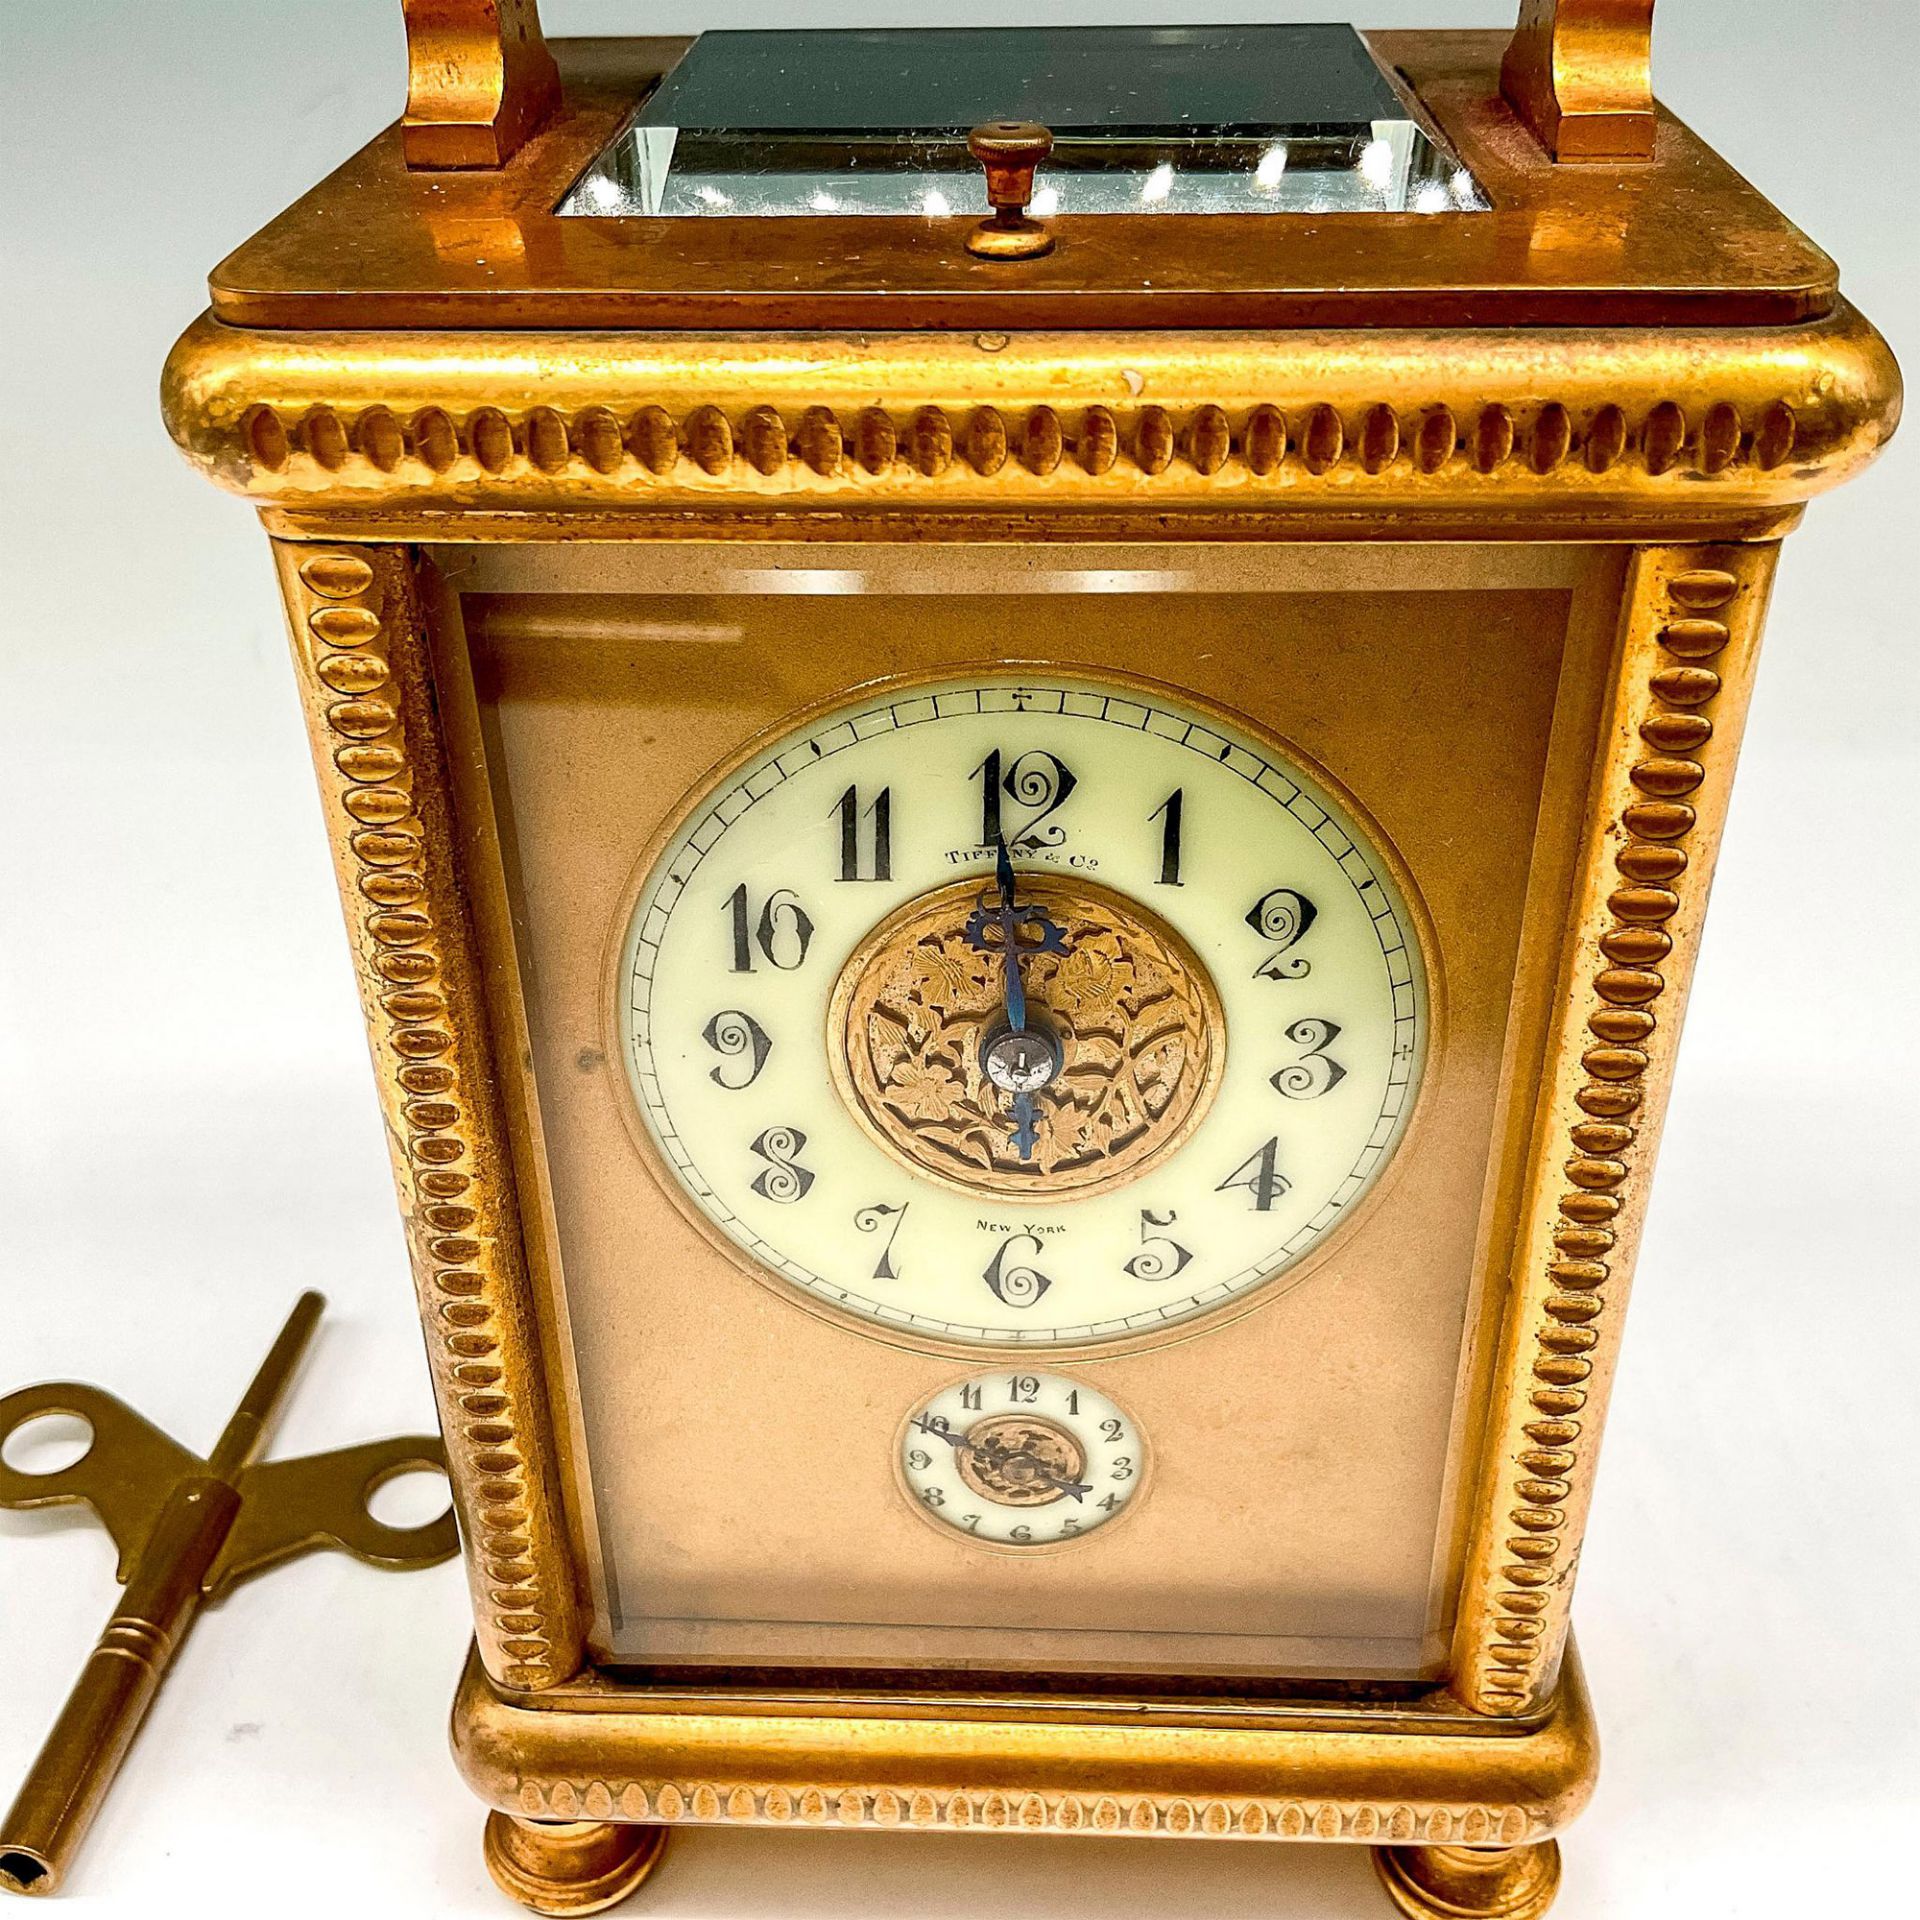 Antique Tiffany & Co. Brass Repeater Carriage Clock - Image 6 of 6